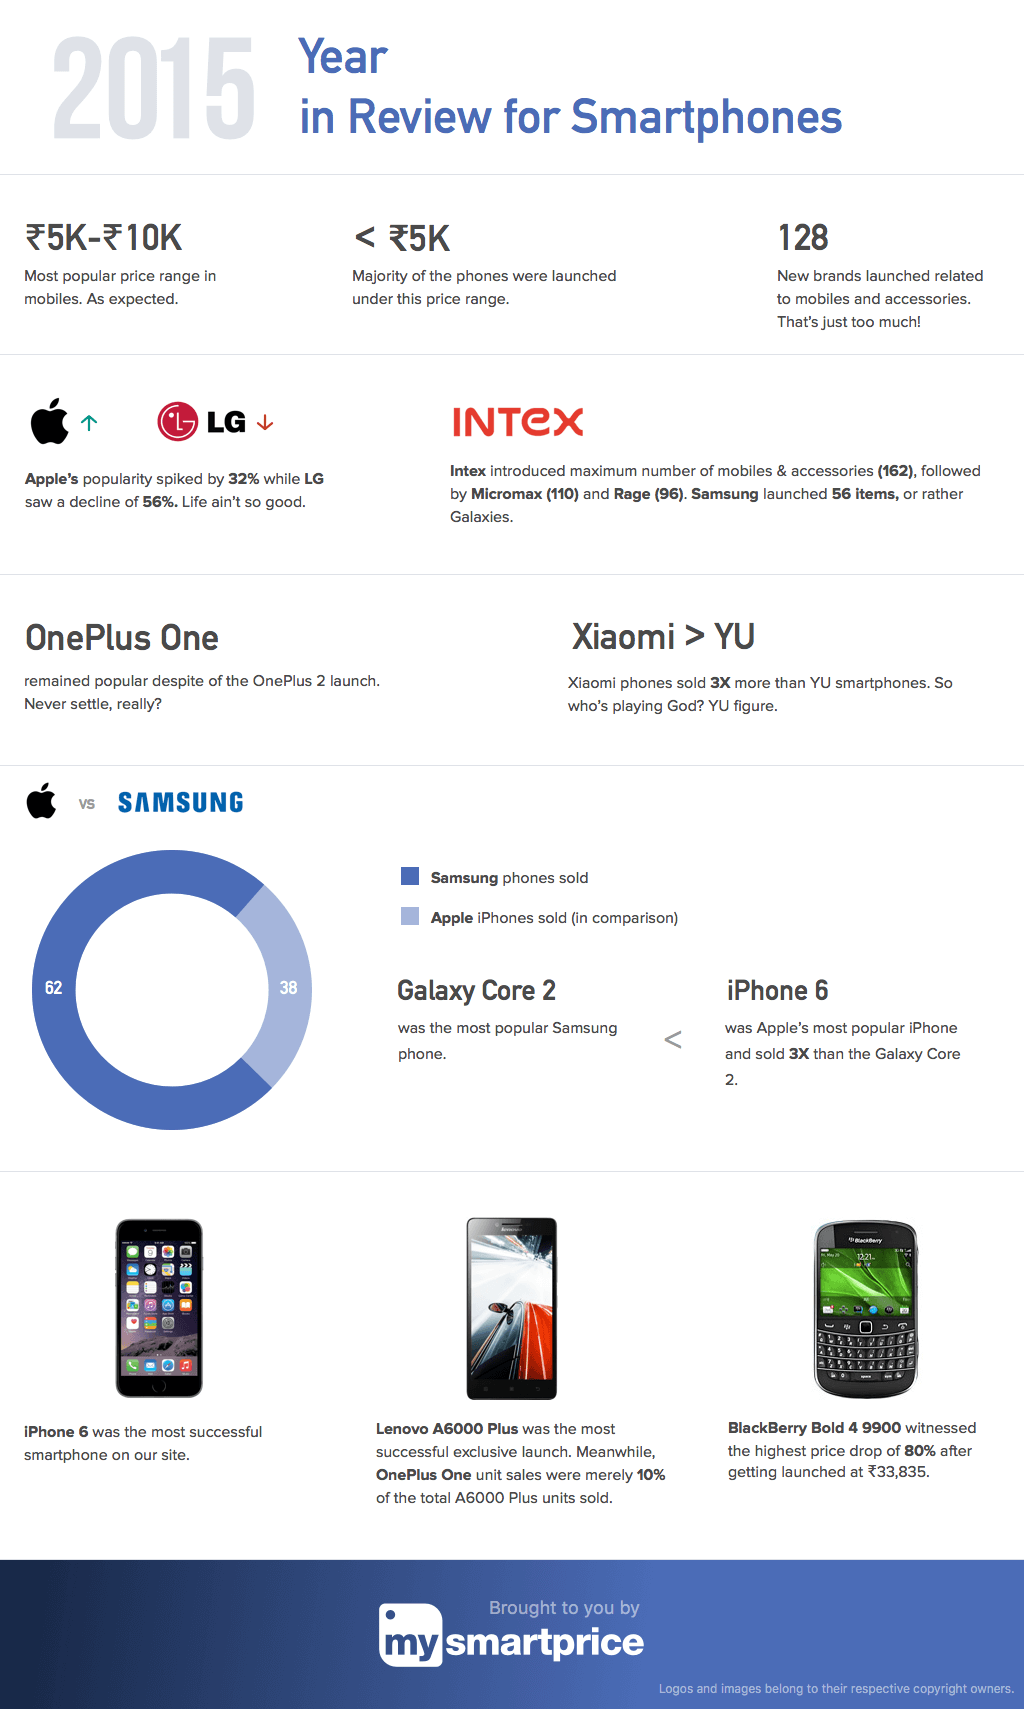 2015 Year in Review for Smartphones